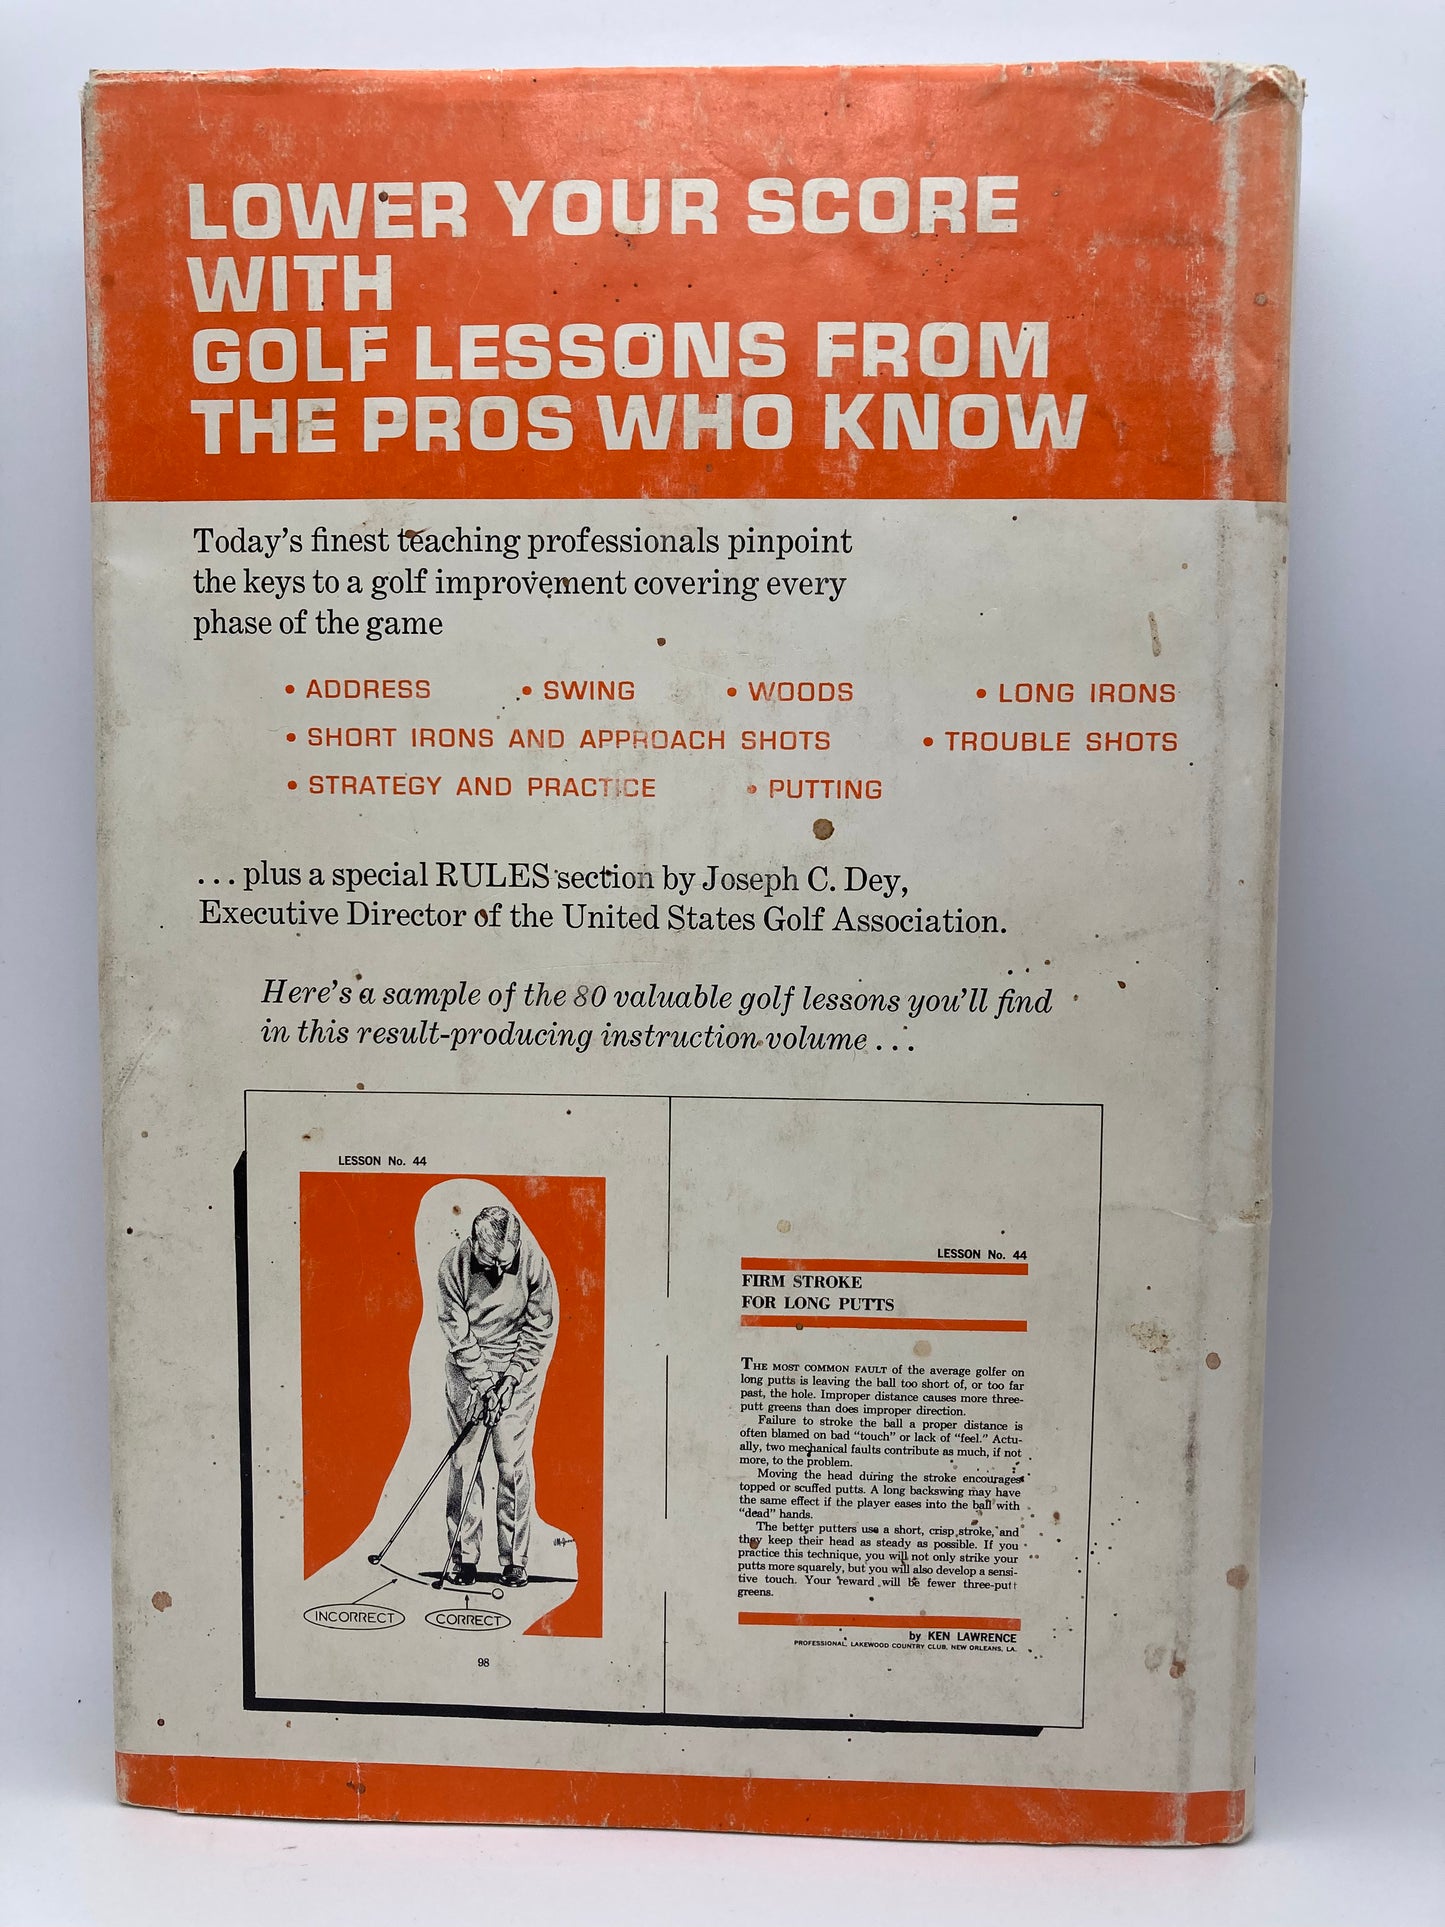 80 Five-Minute Golf Lessons from the World's Greatest Teaching Professionals